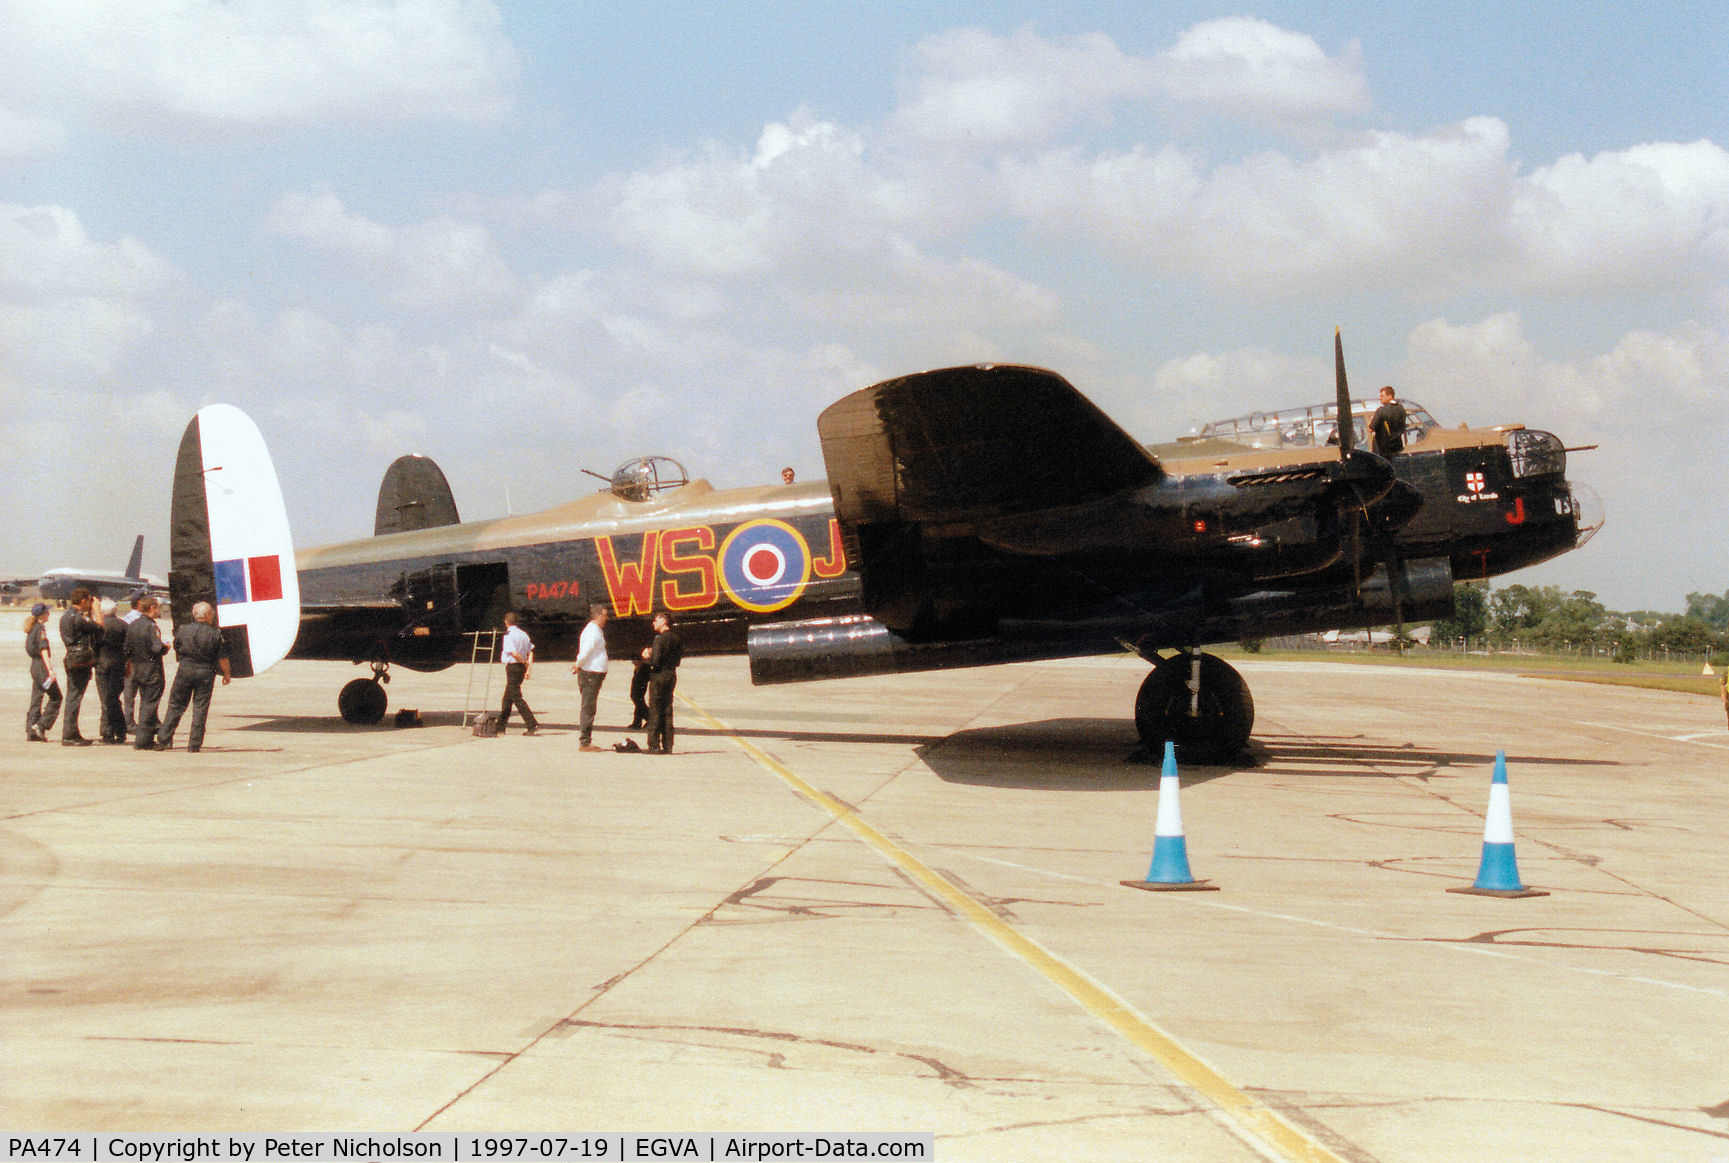 PA474, 1945 Avro 683 Lancaster B1 C/N VACH0052/D2973, The Battle of Britain Memorial Flight's Lancaster was on display at the 1997 Intnl Air Tattoo at RAF Fairford.